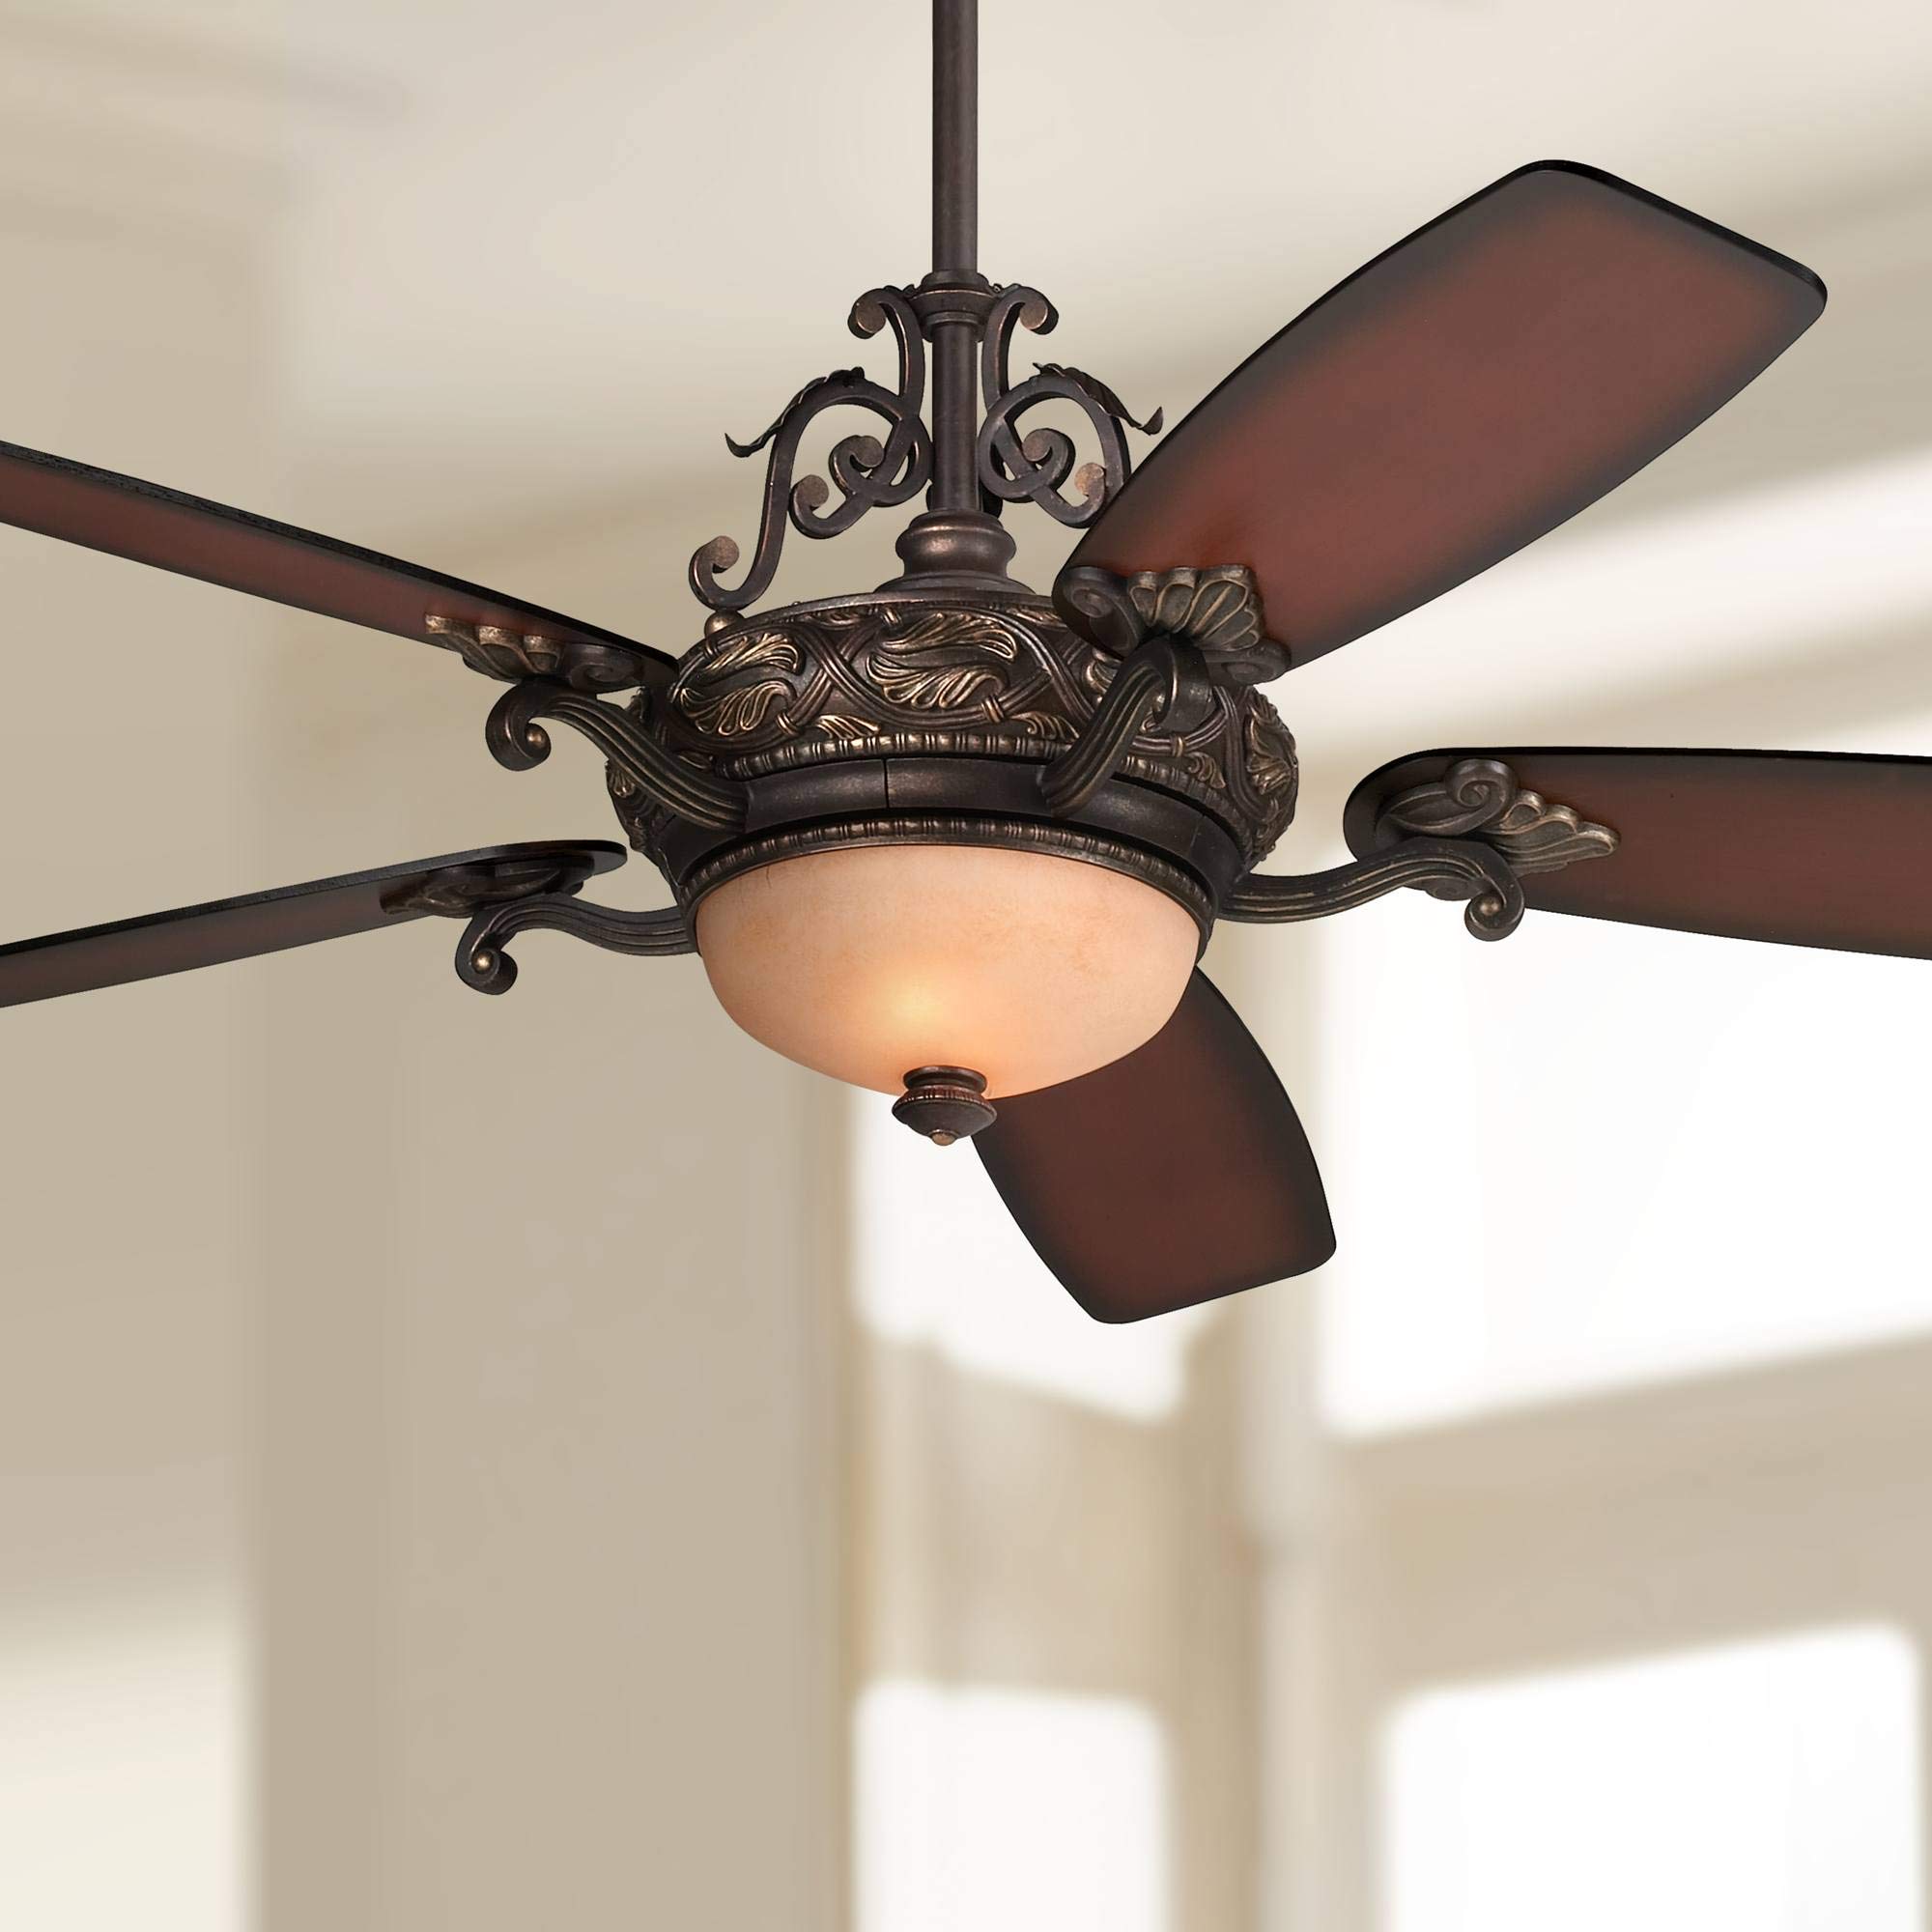 Casa Vieja 56" Casa Esperanza Vintage Indoor Ceiling Fan with Light LED Remote Control Dimmable Antique Bronze Gold Shaded Teak Blades for House Bedroom Living Room Home Kitchen Dining Office